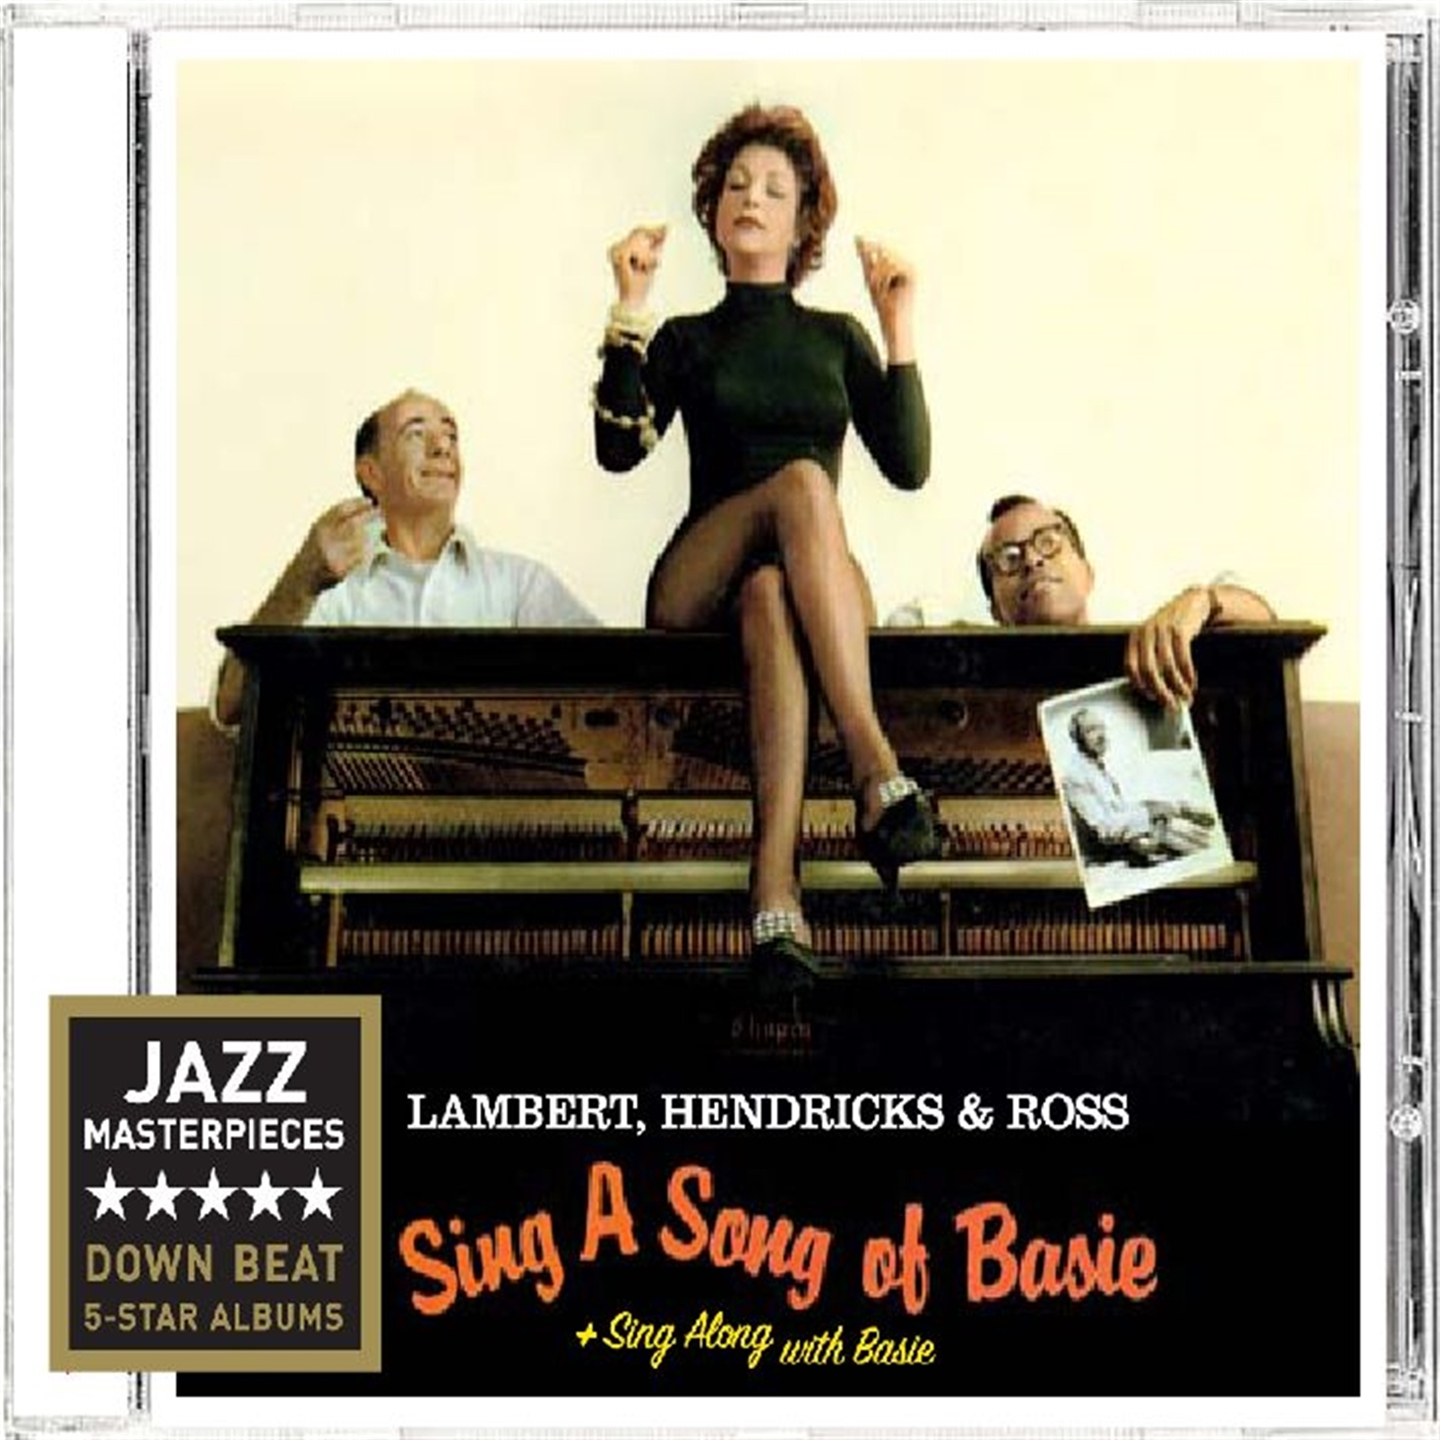 SING A SONG OF BASIE (+ SING ALONG WITH BASIE)